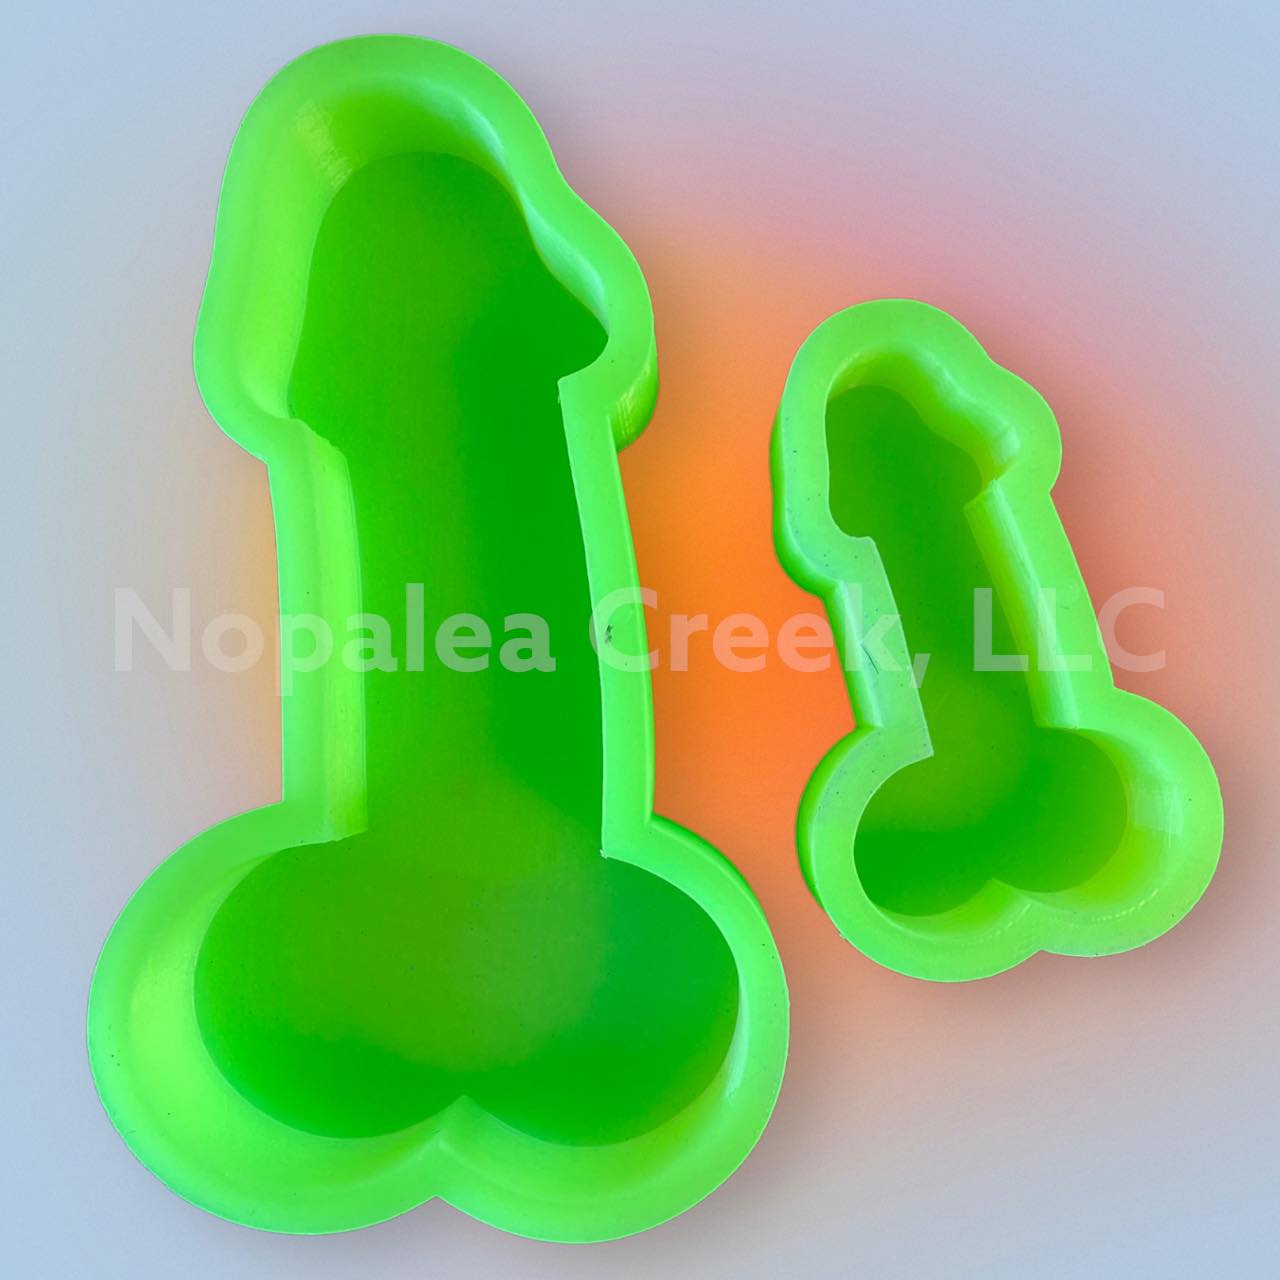 Penis Mold, Dick Mold, Silicone Penis Mold, Penis Candle Mold